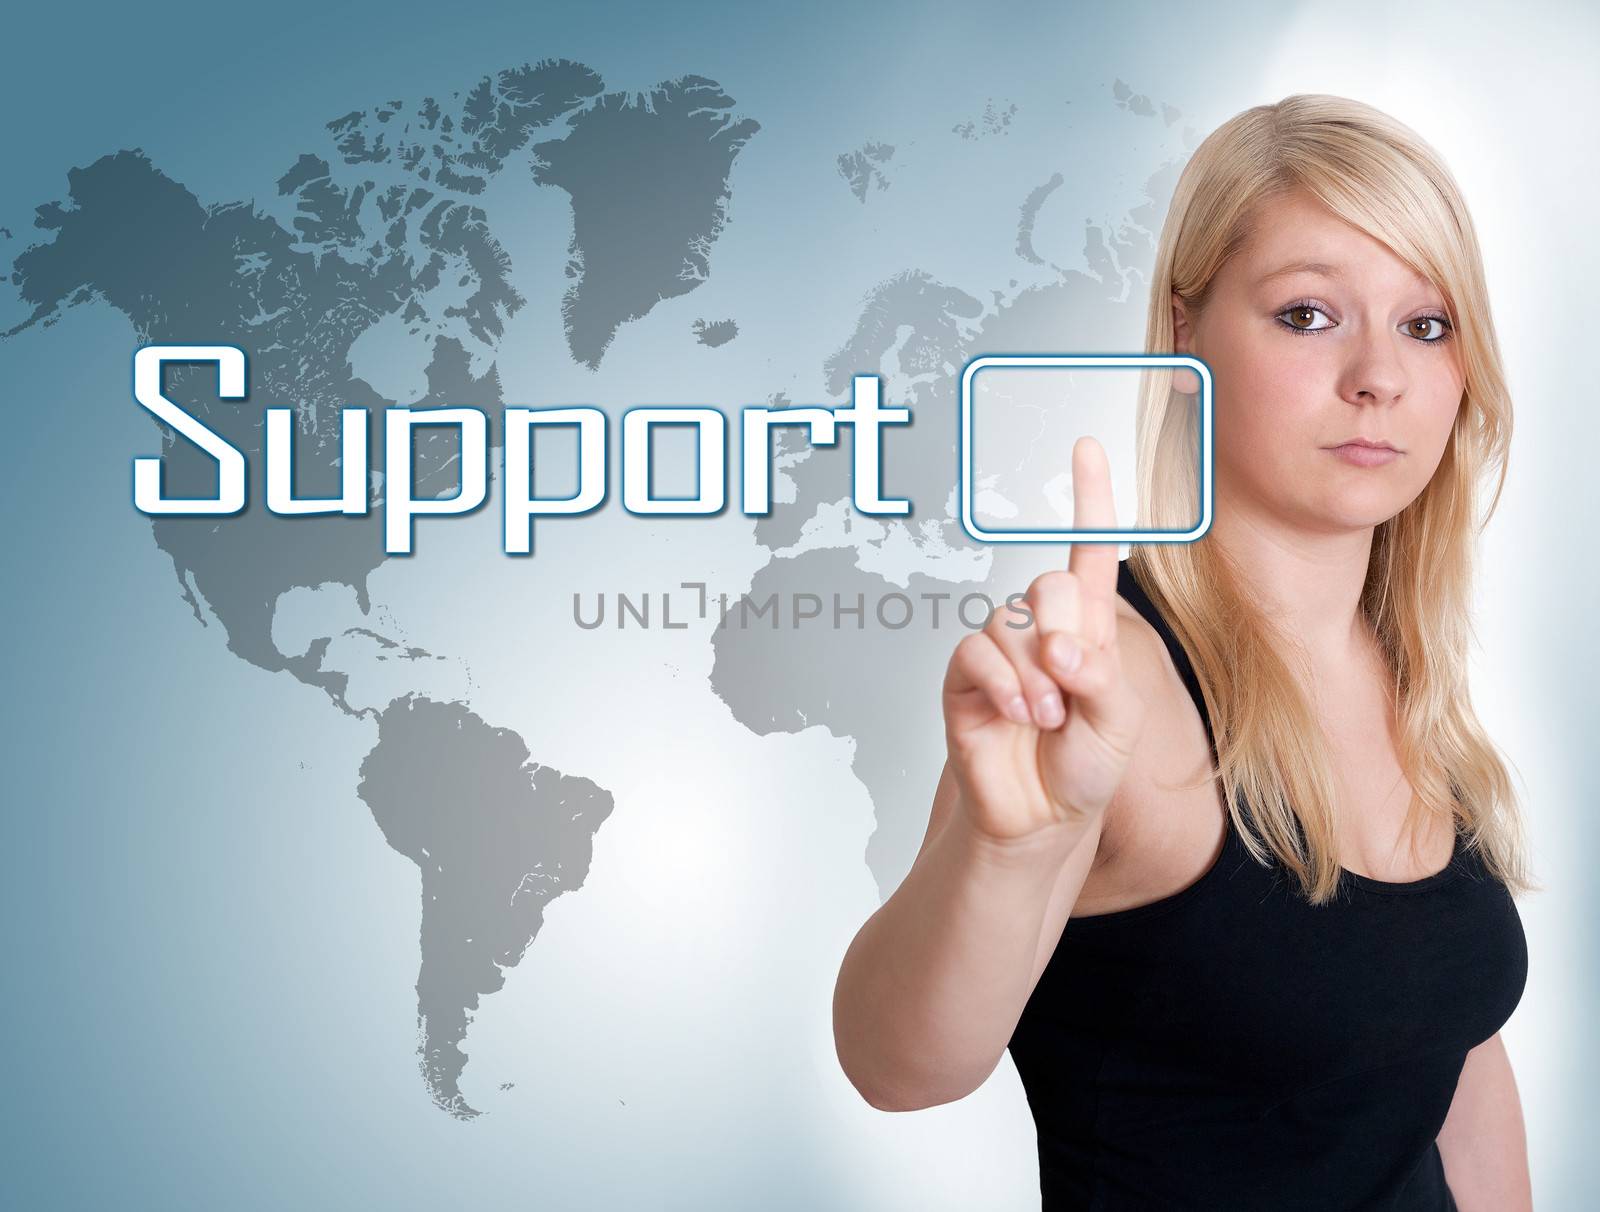 Young woman press digital support button on interface in front of her